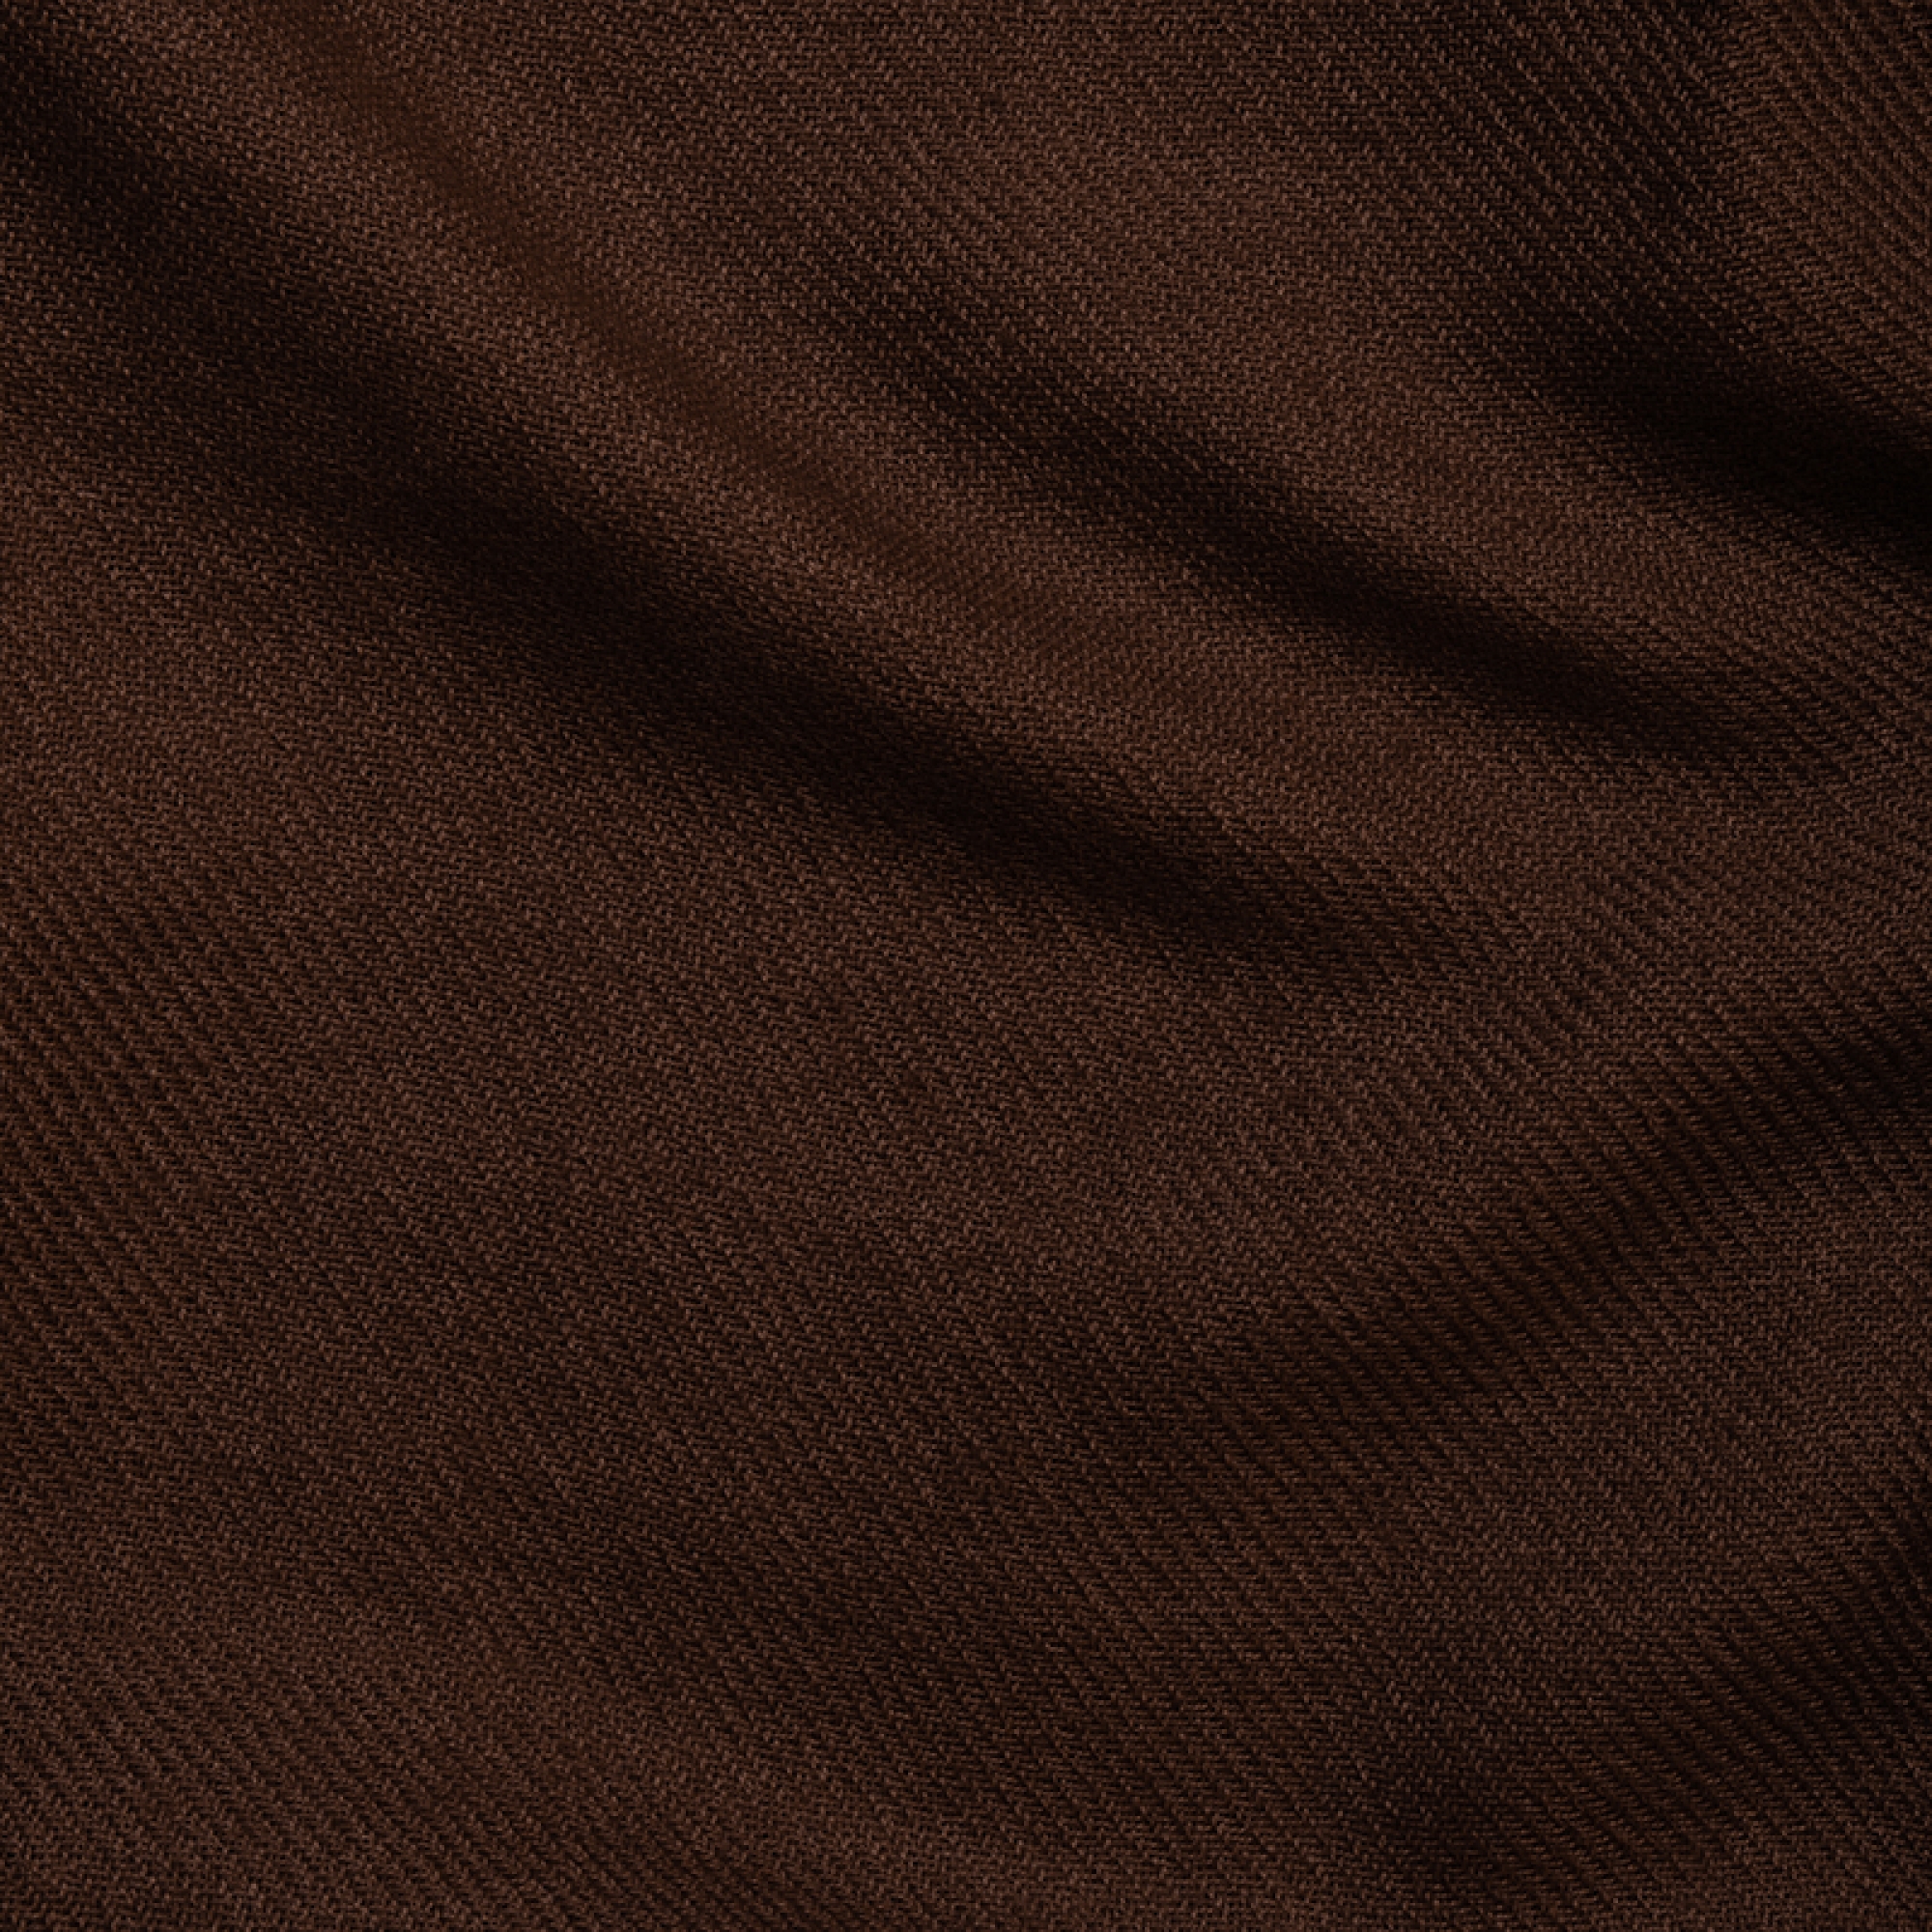 Cashmere accessories blanket toodoo plain l 220 x 220 cacao 220x220cm